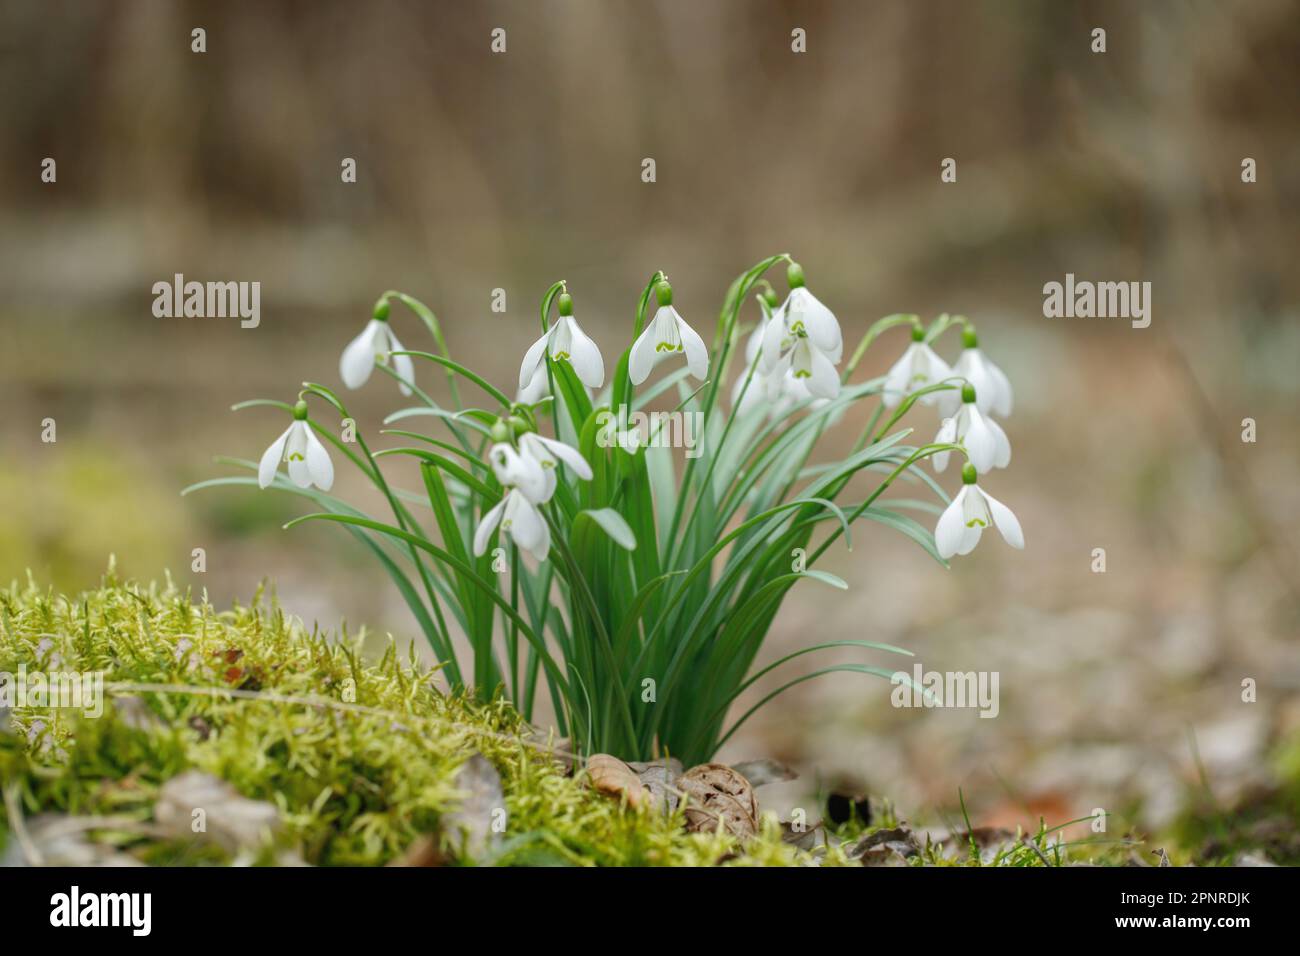 Group of wild growing snowdrops (Galanthus nivalis). Stock Photo